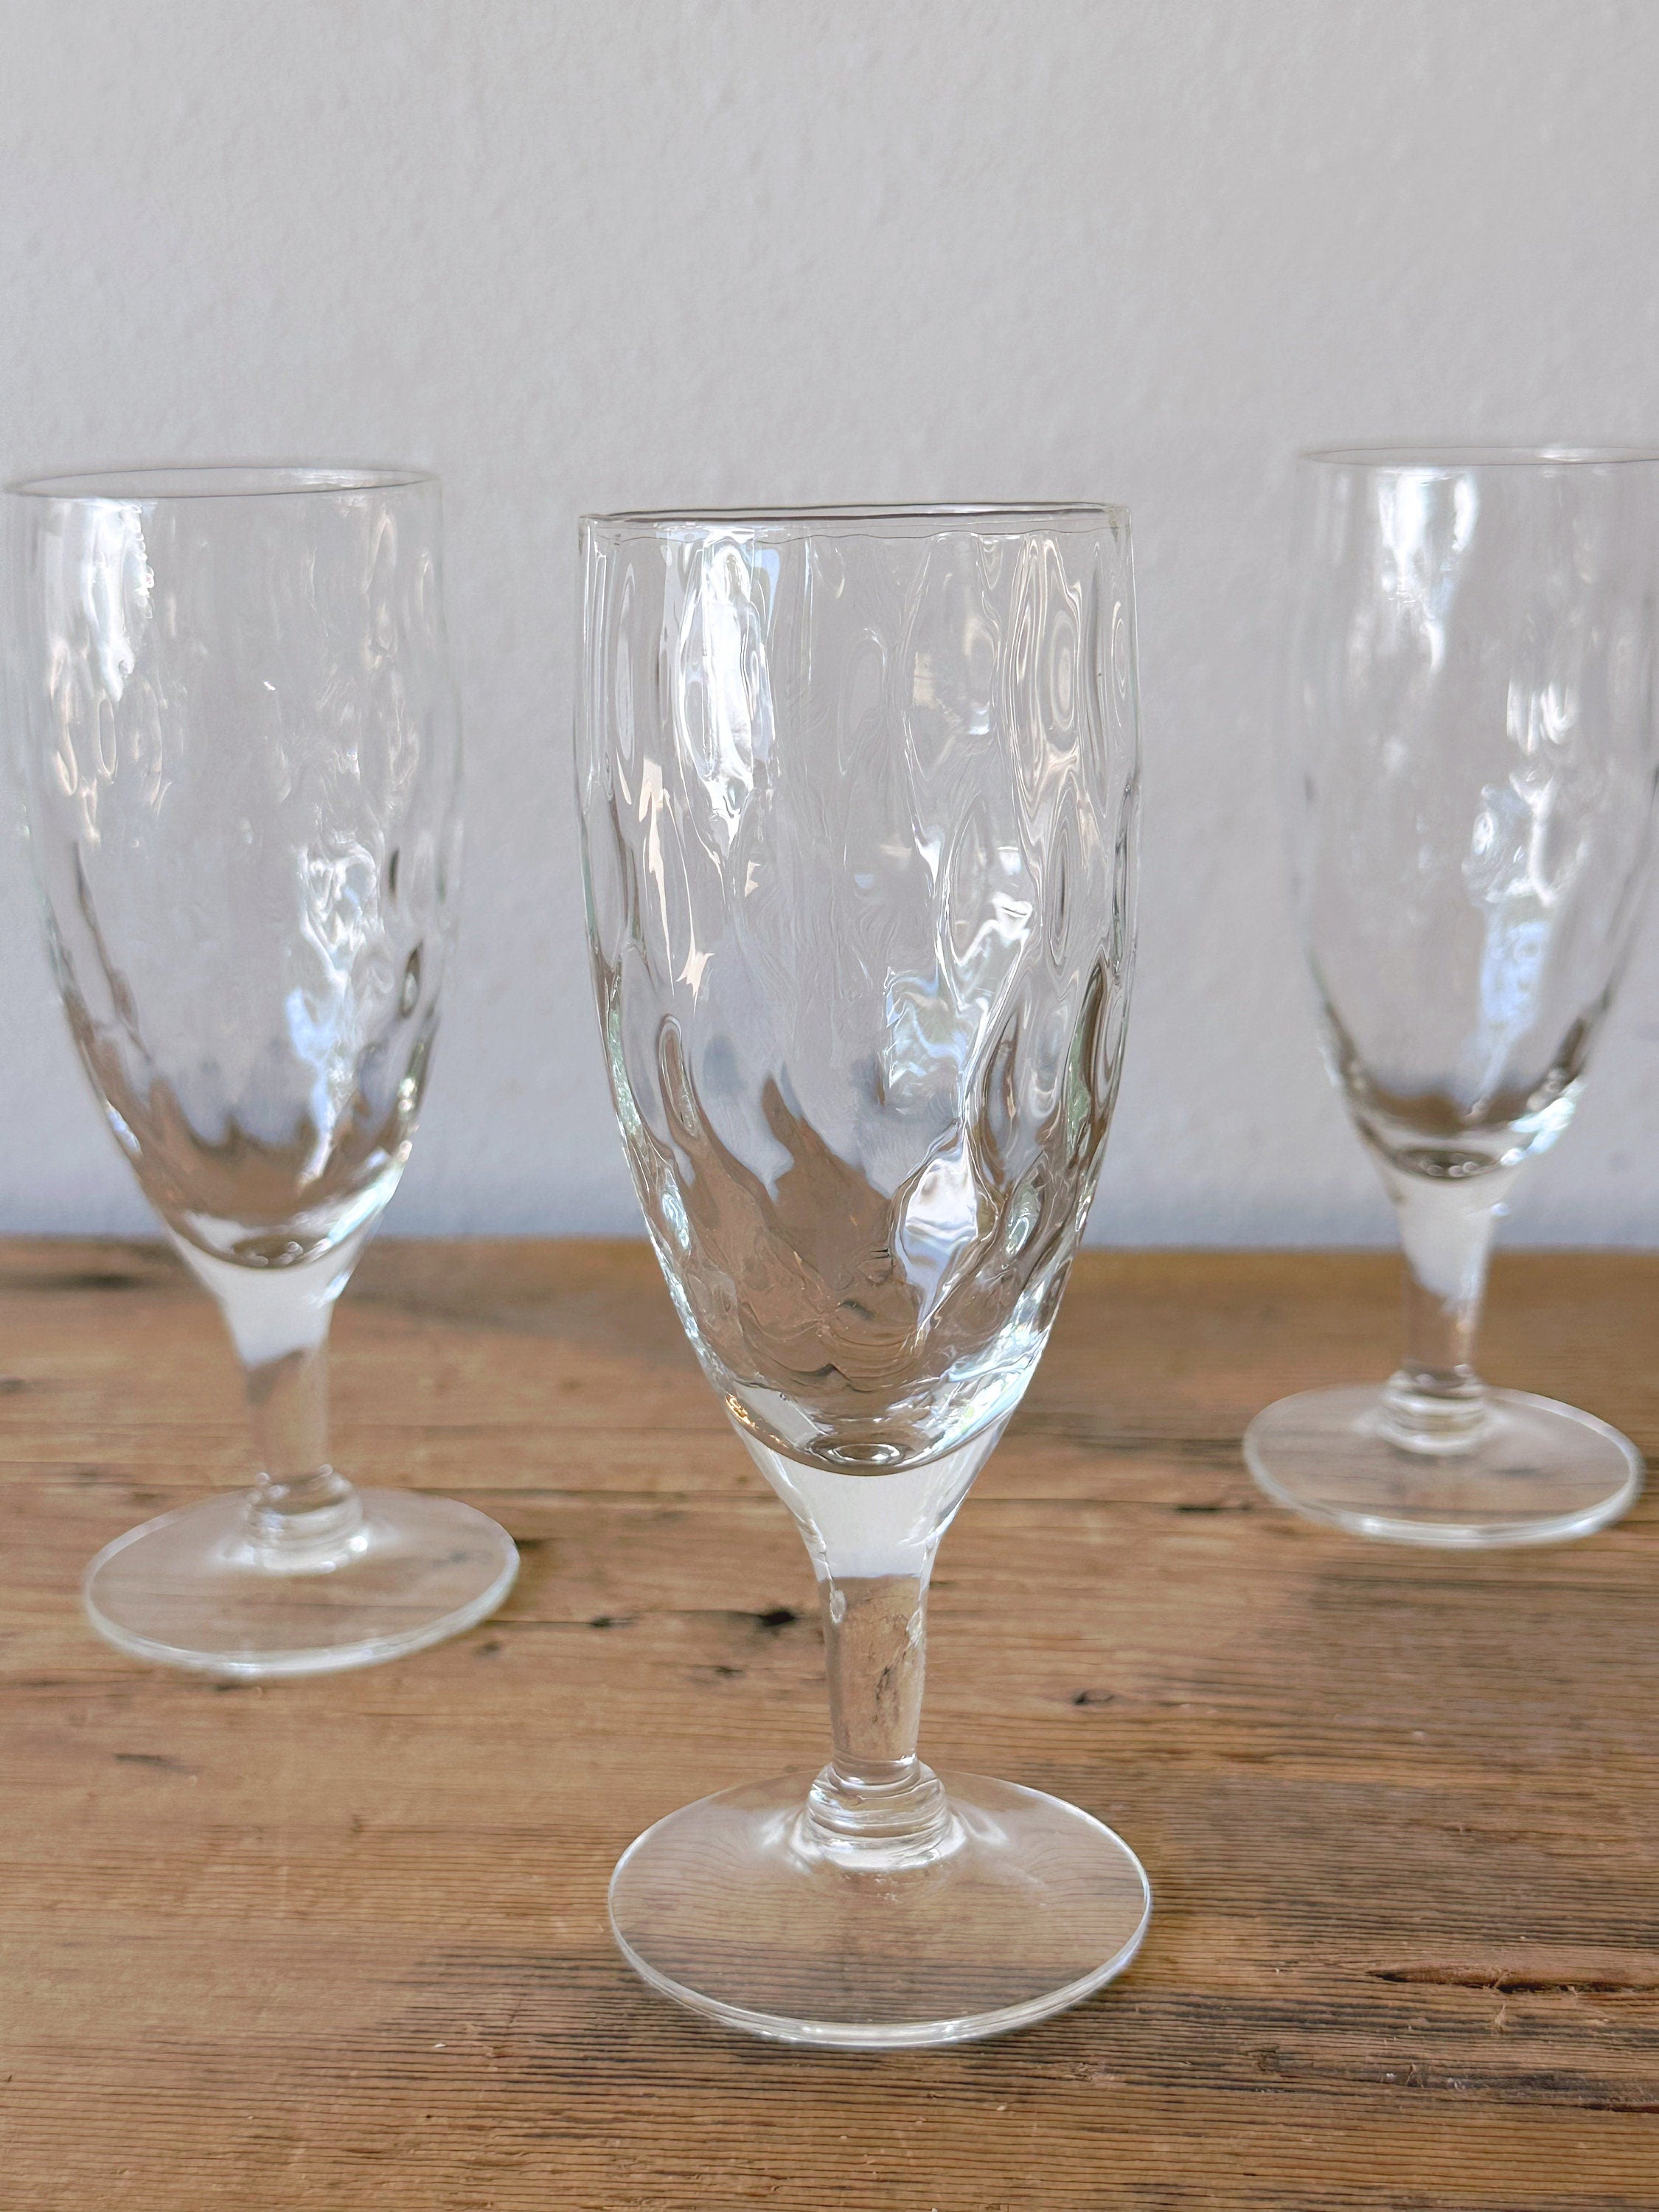 Vintage Small Champagne Flutes with Ripple Pattern in Set of 2, 4, or 6 | Short Wine Glasses Wedding Gift Bridal Shower Gift